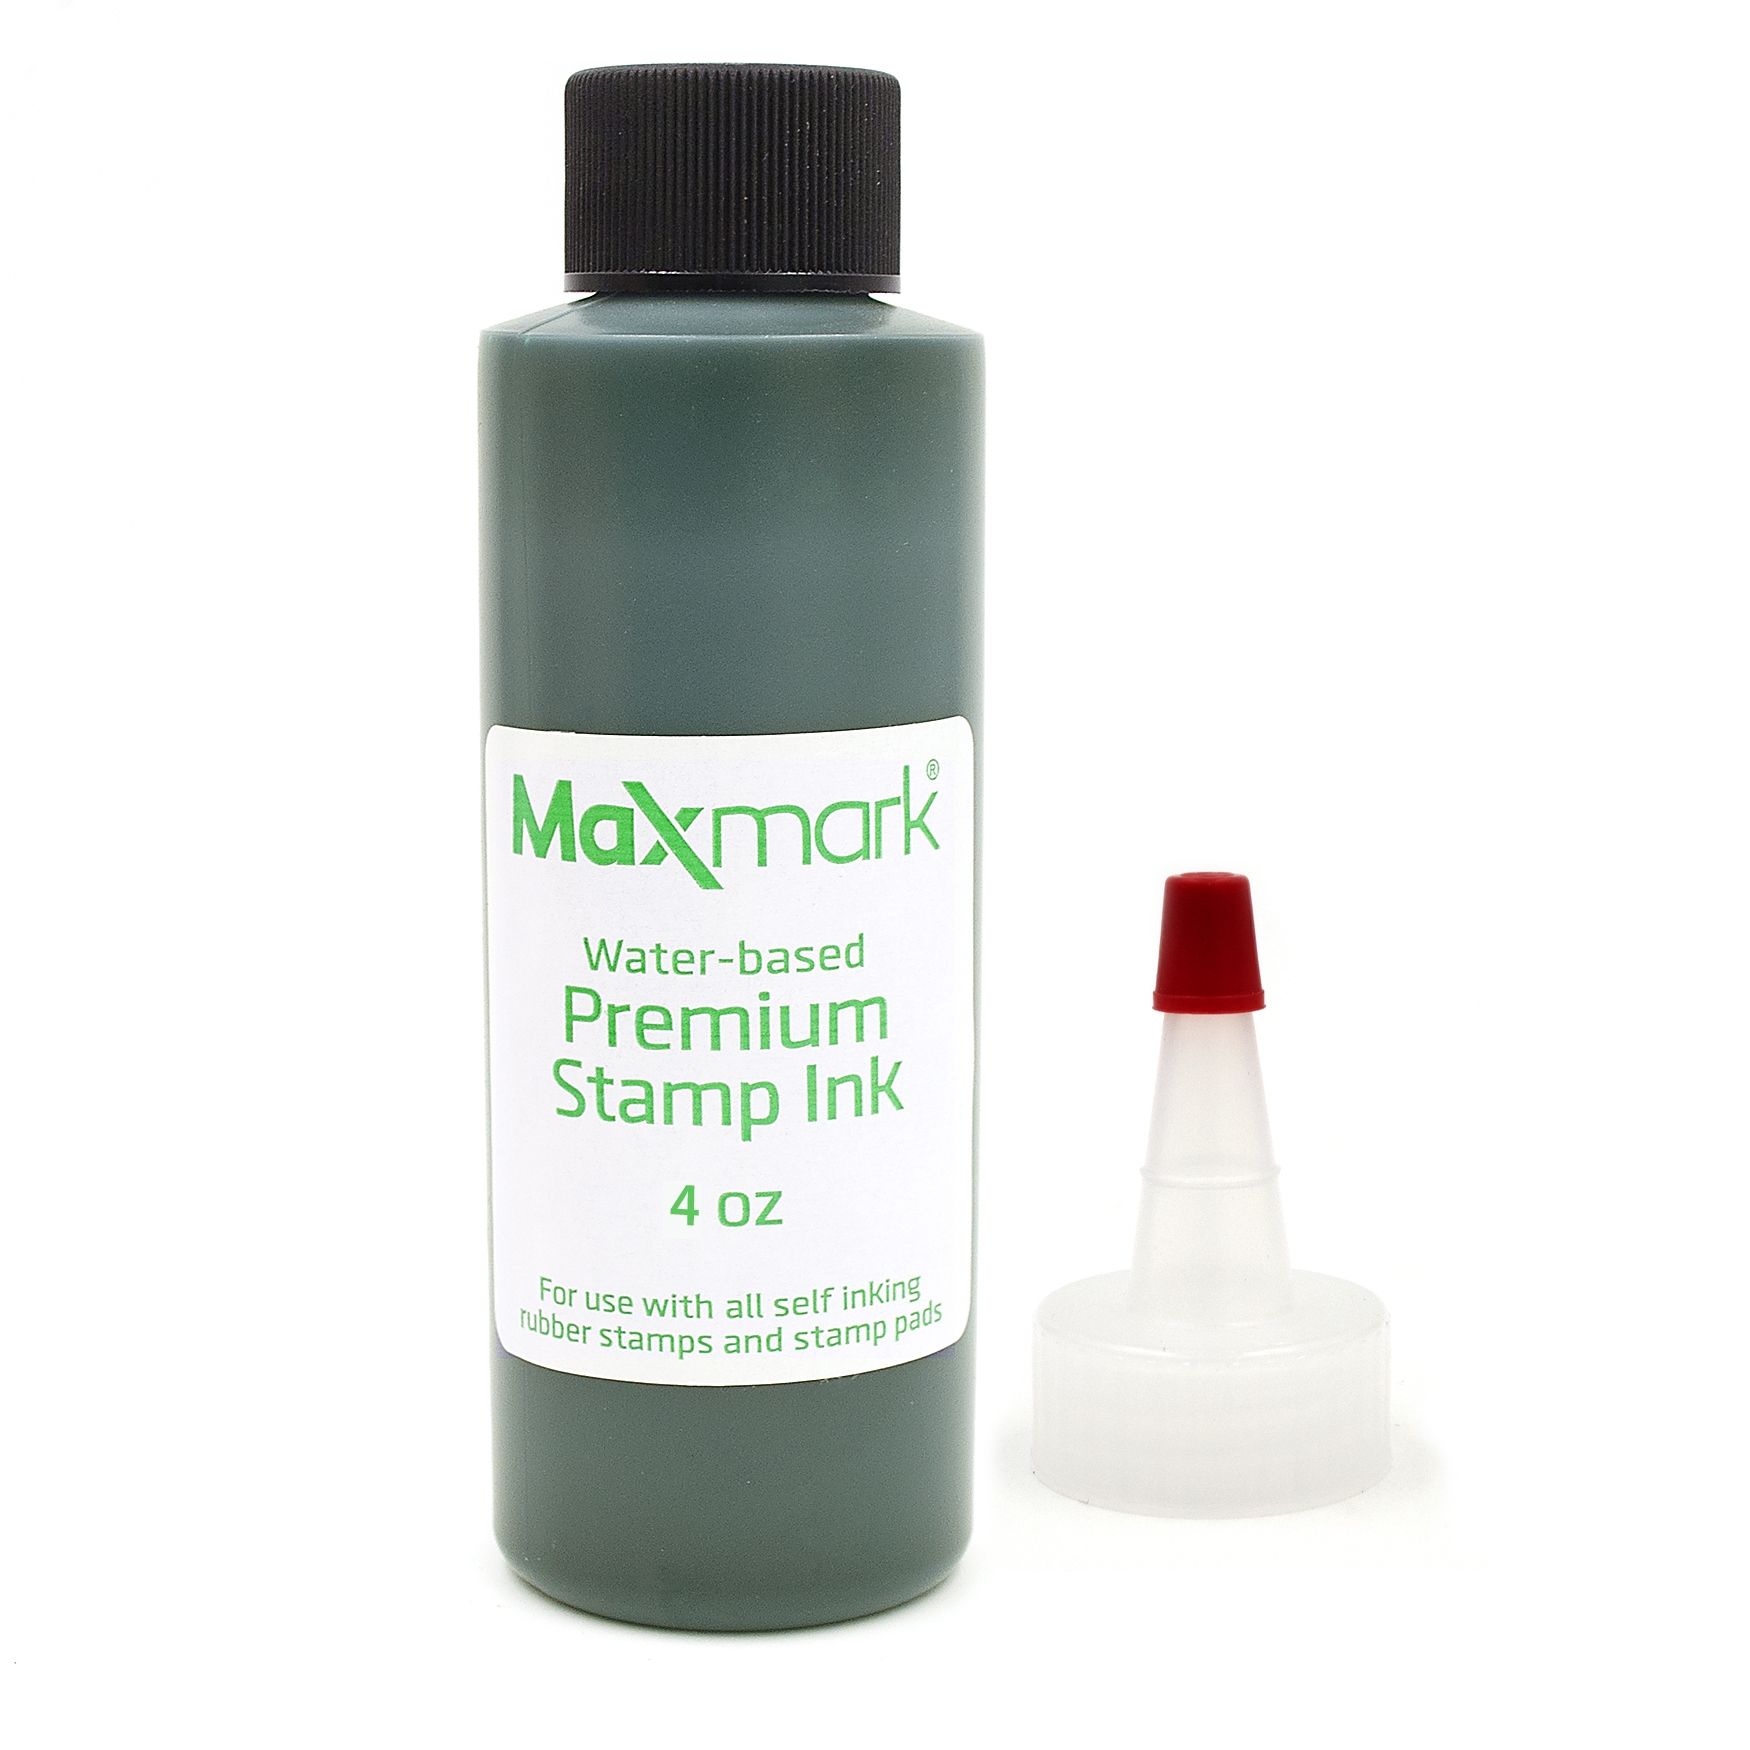 Premium Refill Ink for self Inking Stamps and Stamp Pads, Green Color - 4 oz.